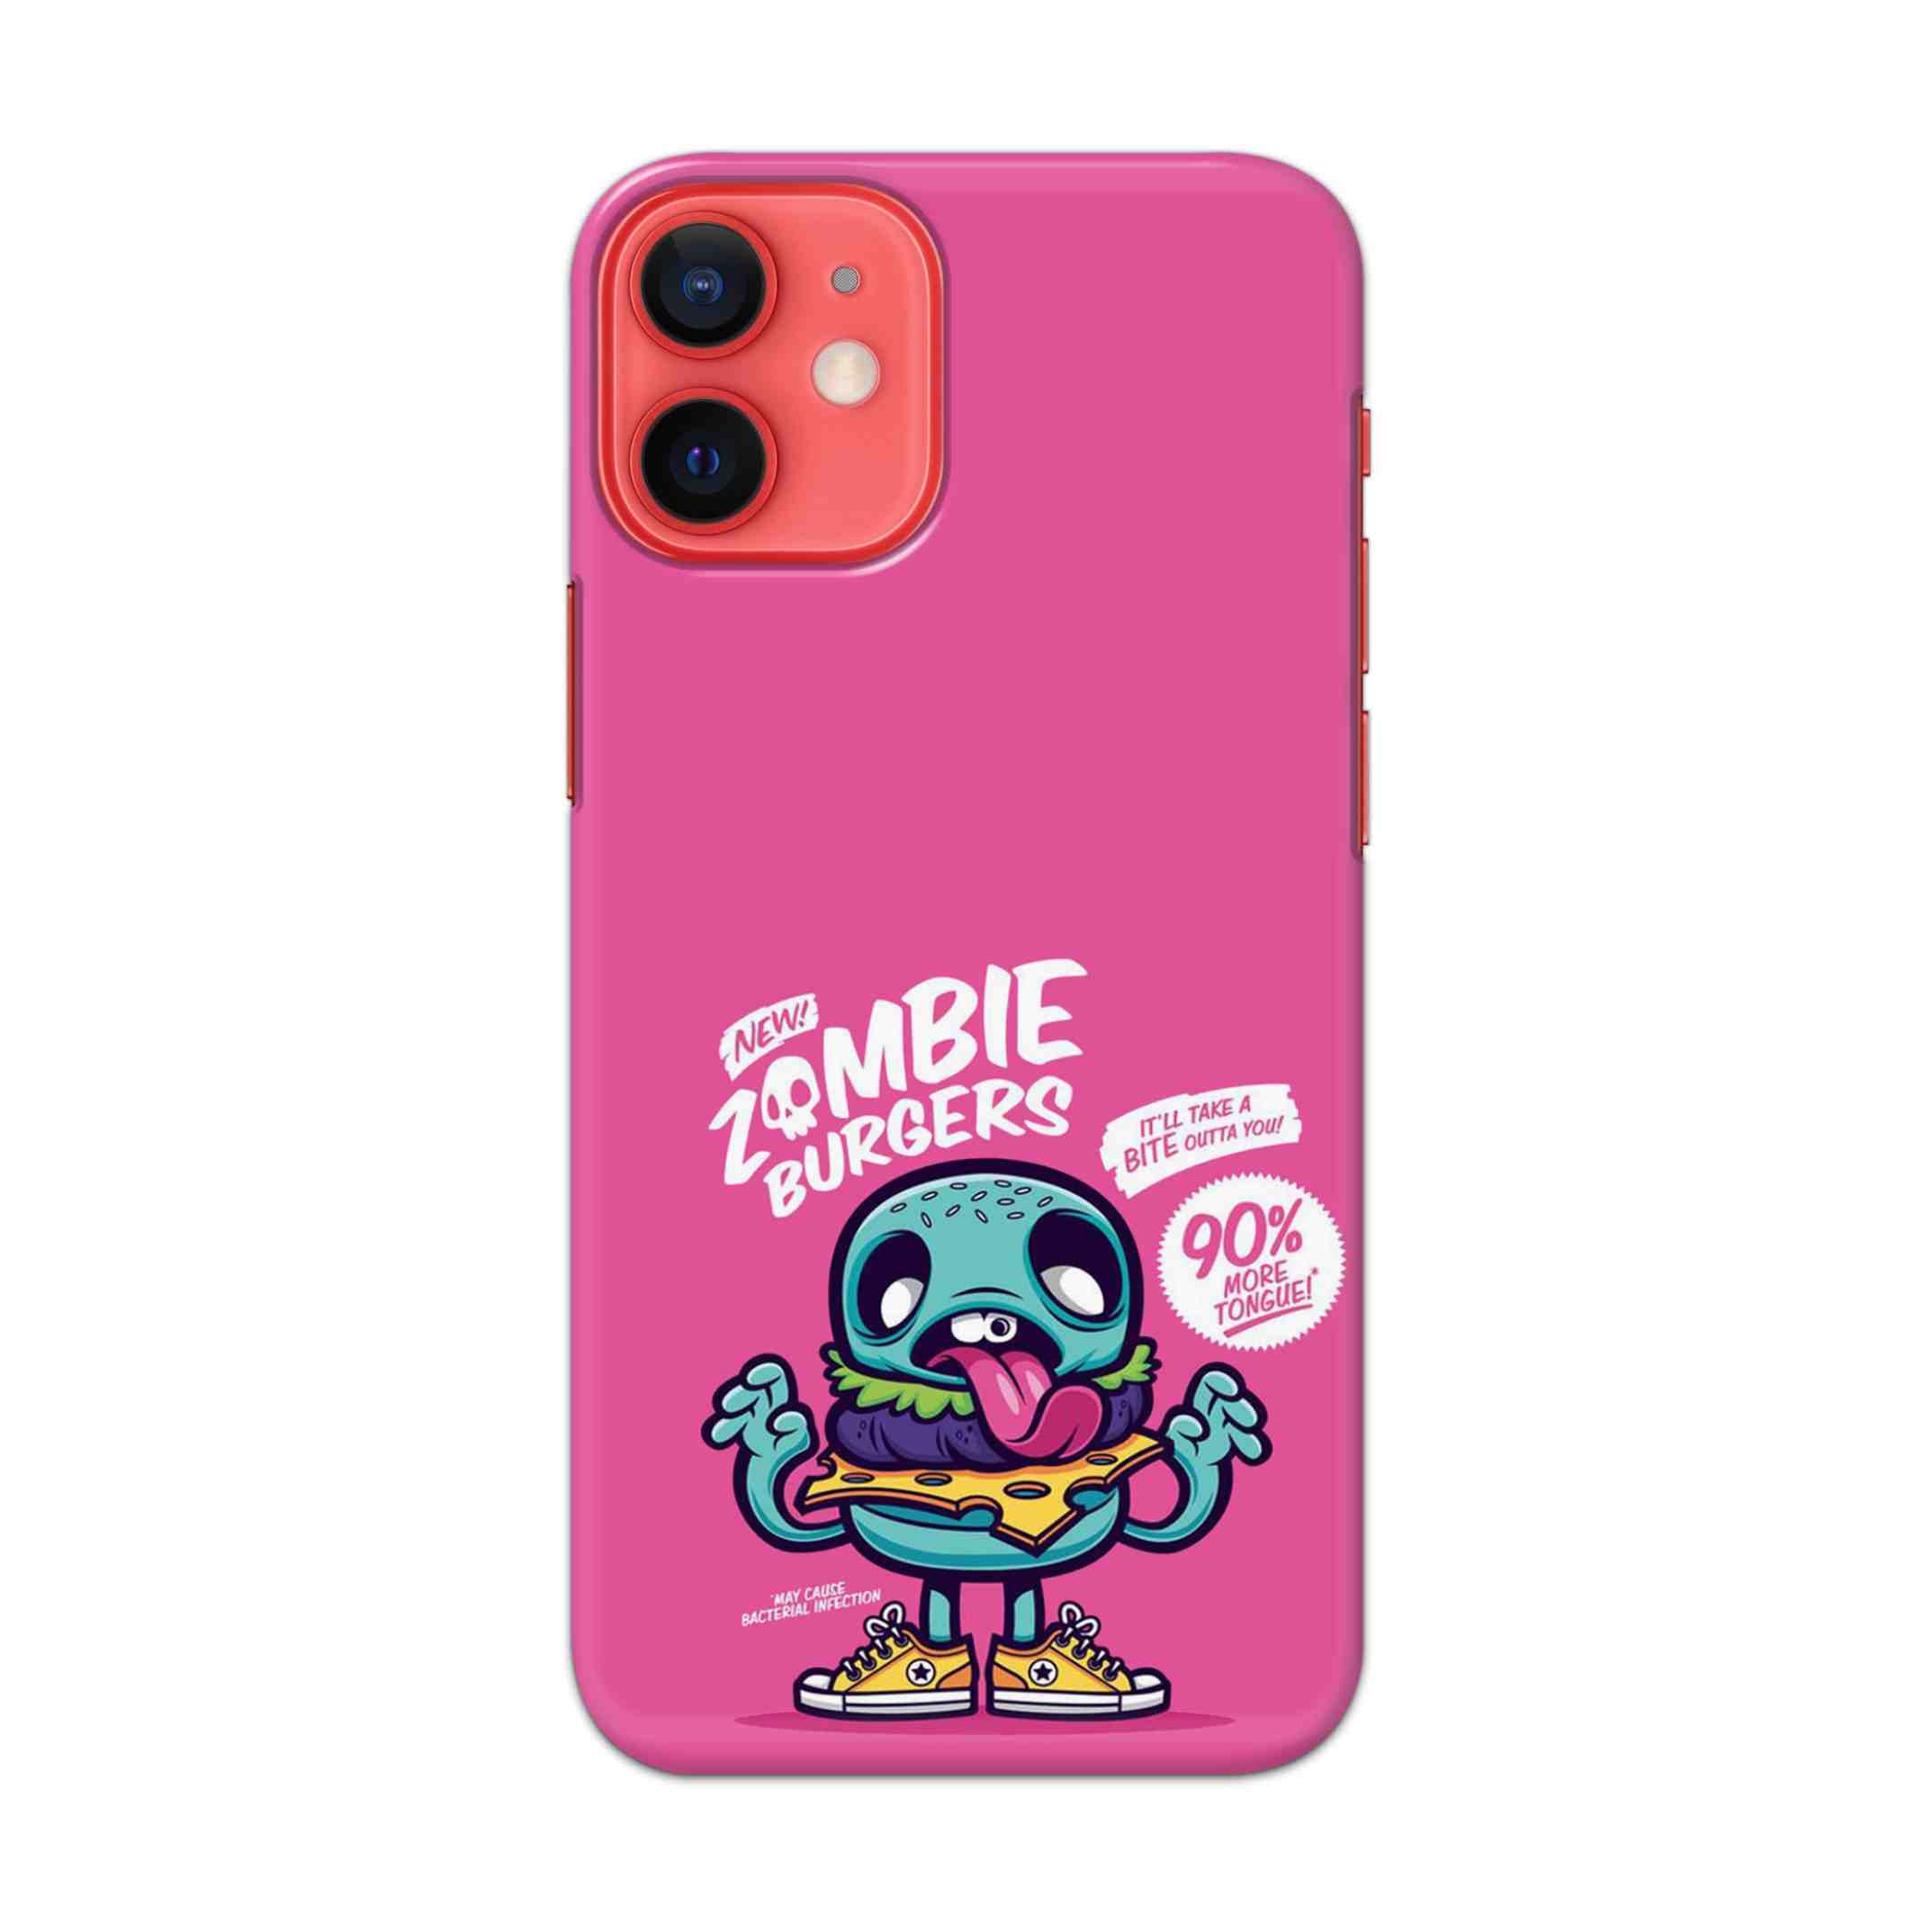 Buy New Zombie Burgers Hard Back Mobile Phone Case/Cover For Apple iPhone 12 mini Online